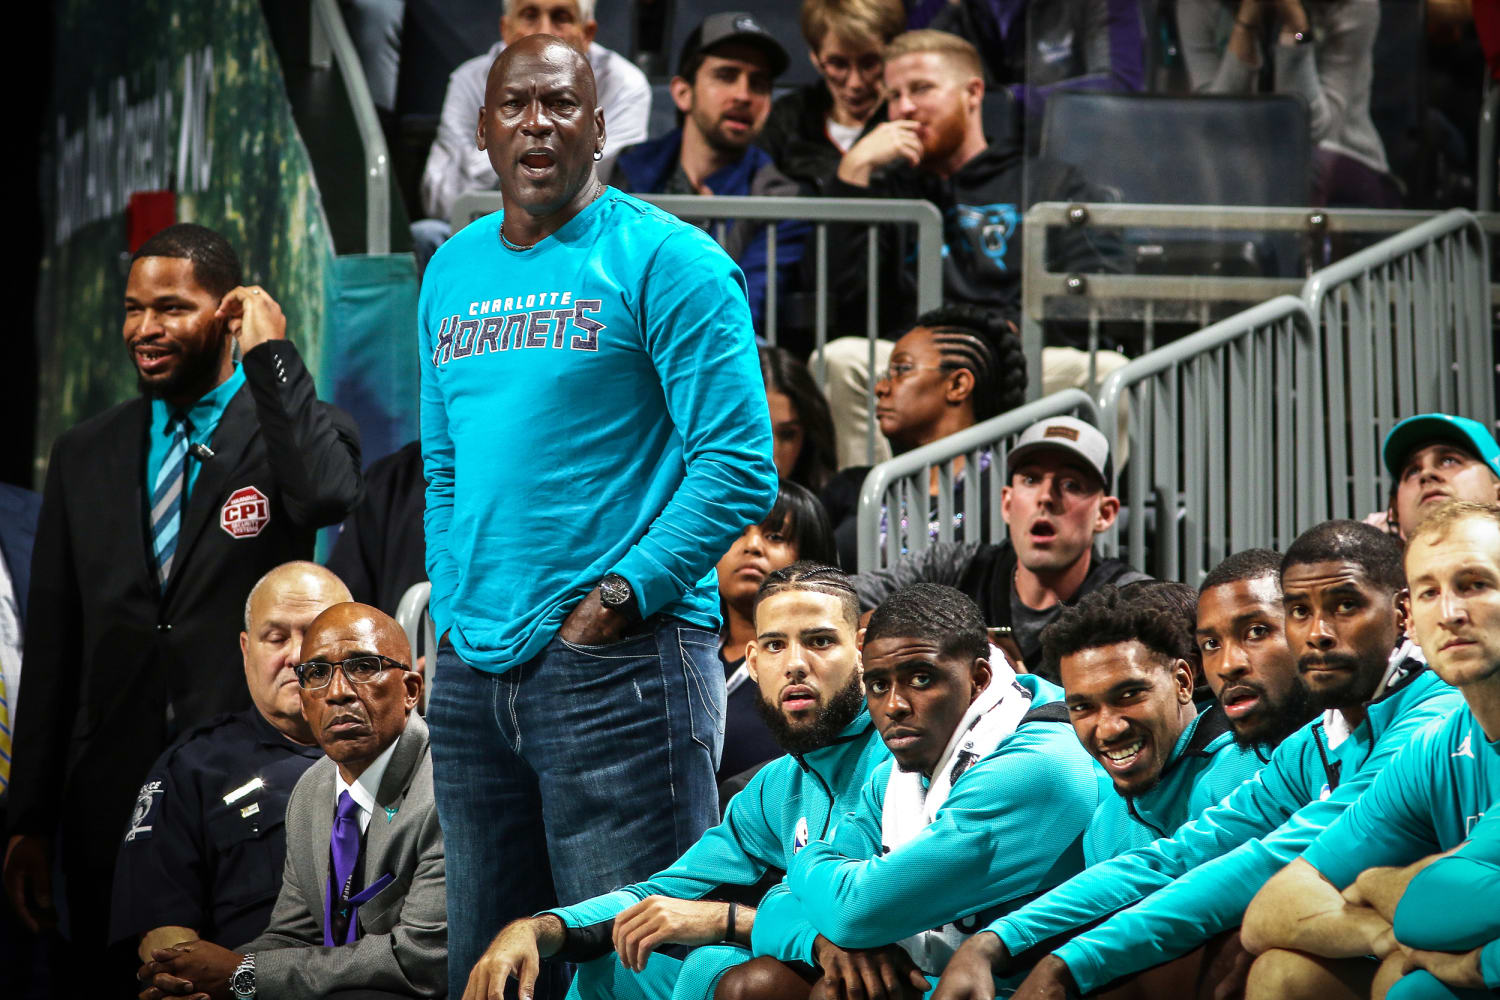 Who are the 2 men who bought Charlotte Hornets from Jordan